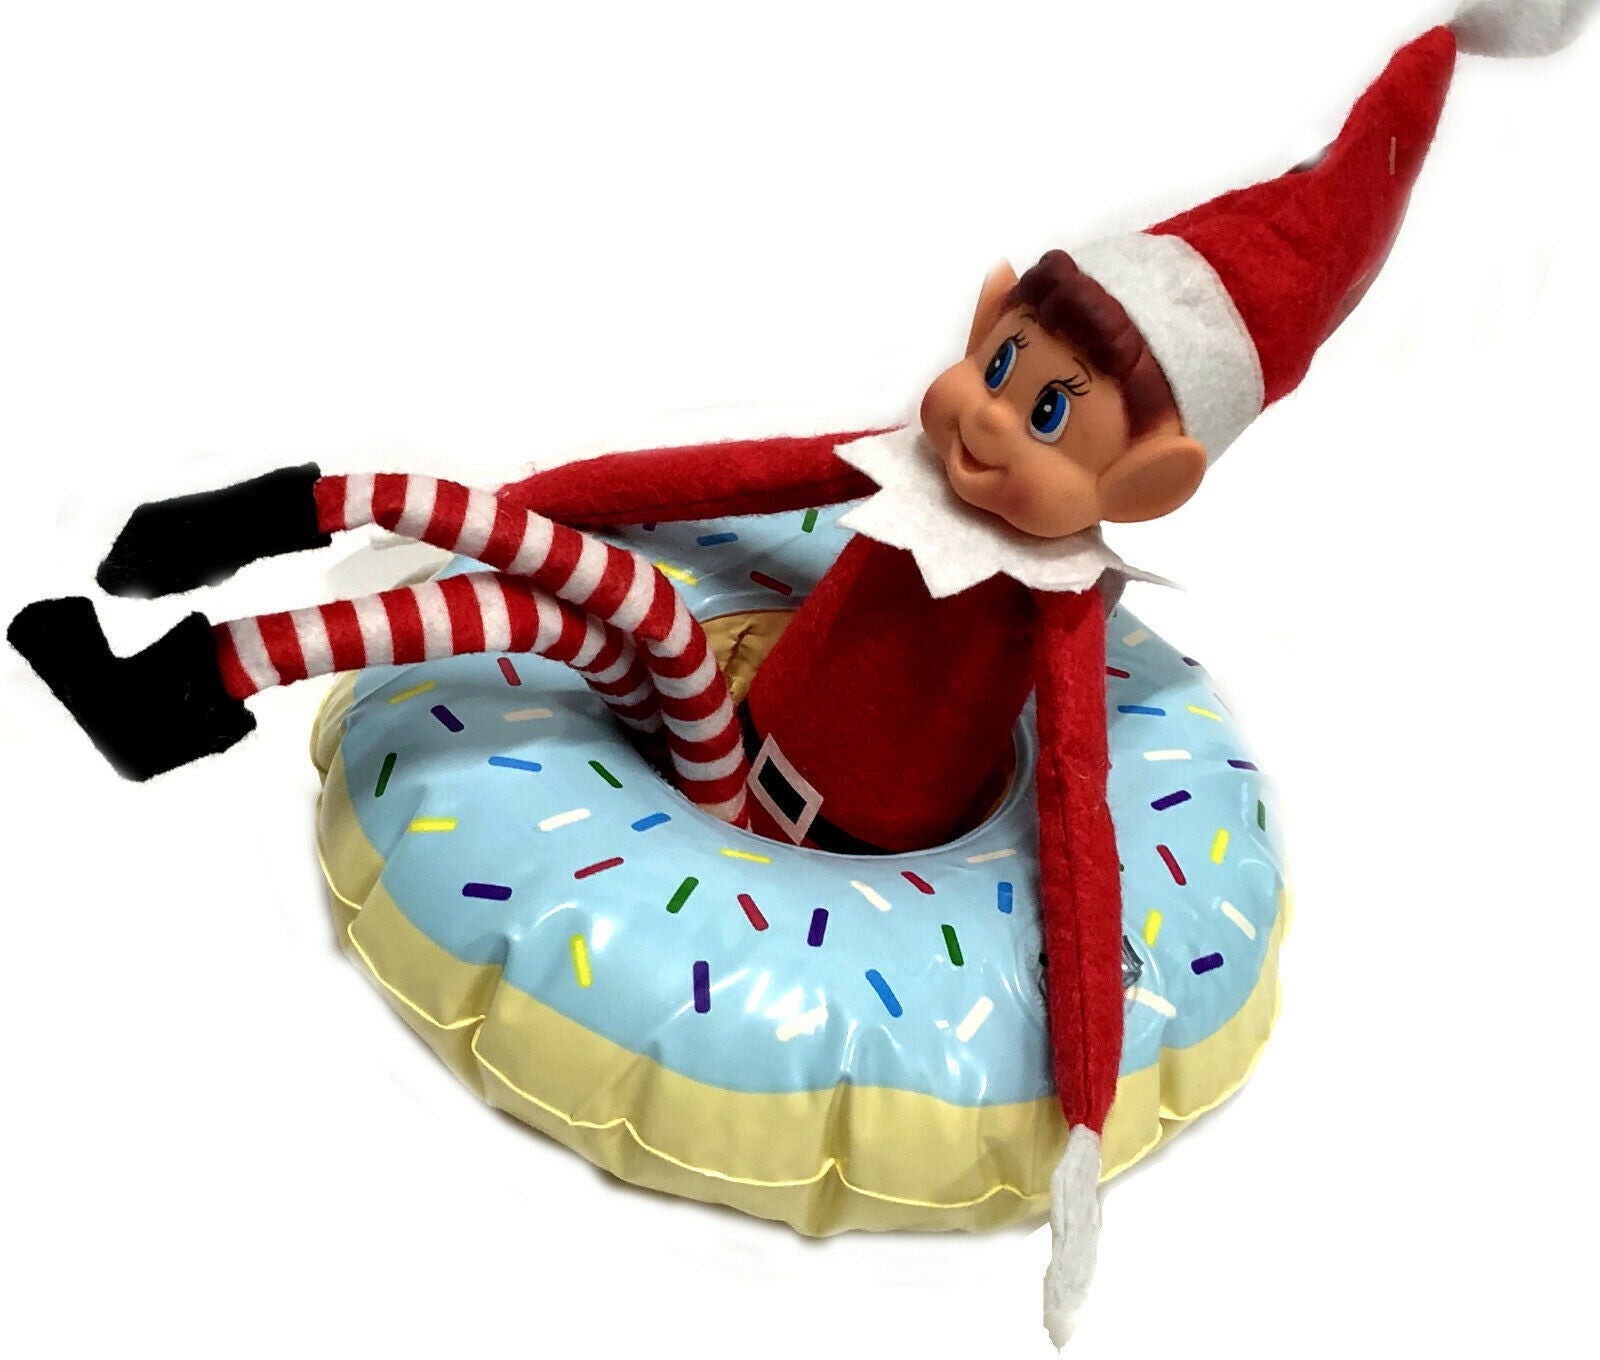 Elf on a Shelf Inflatable Donut (Elf not included)